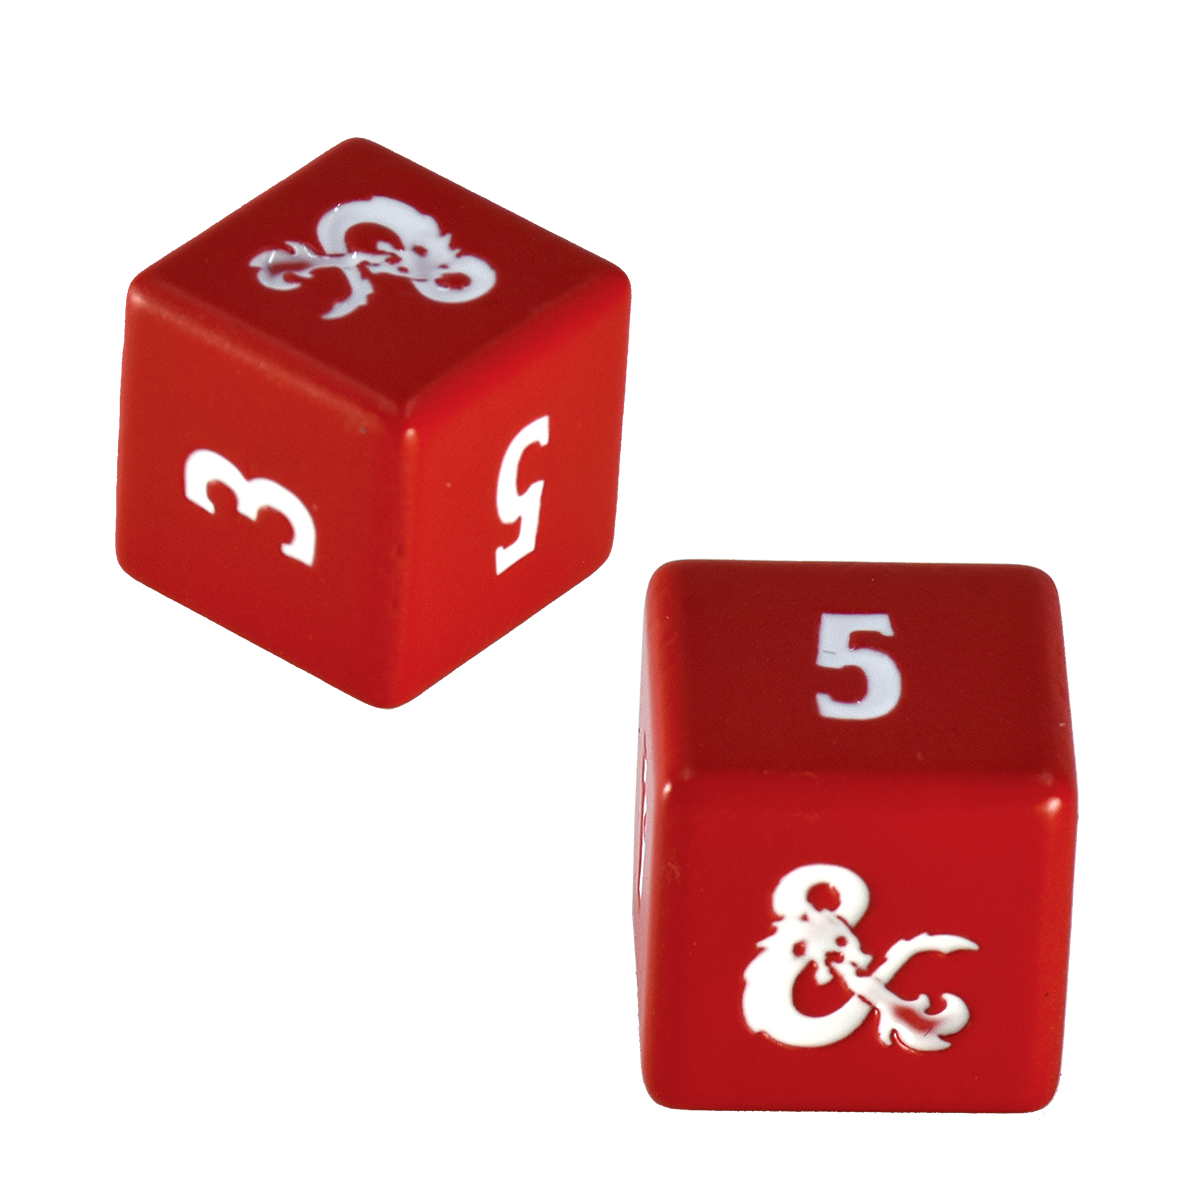 Heavy Metal Red and White D6 Dice Set (4ct) for Dungeons & Dragons | Ultra PRO International